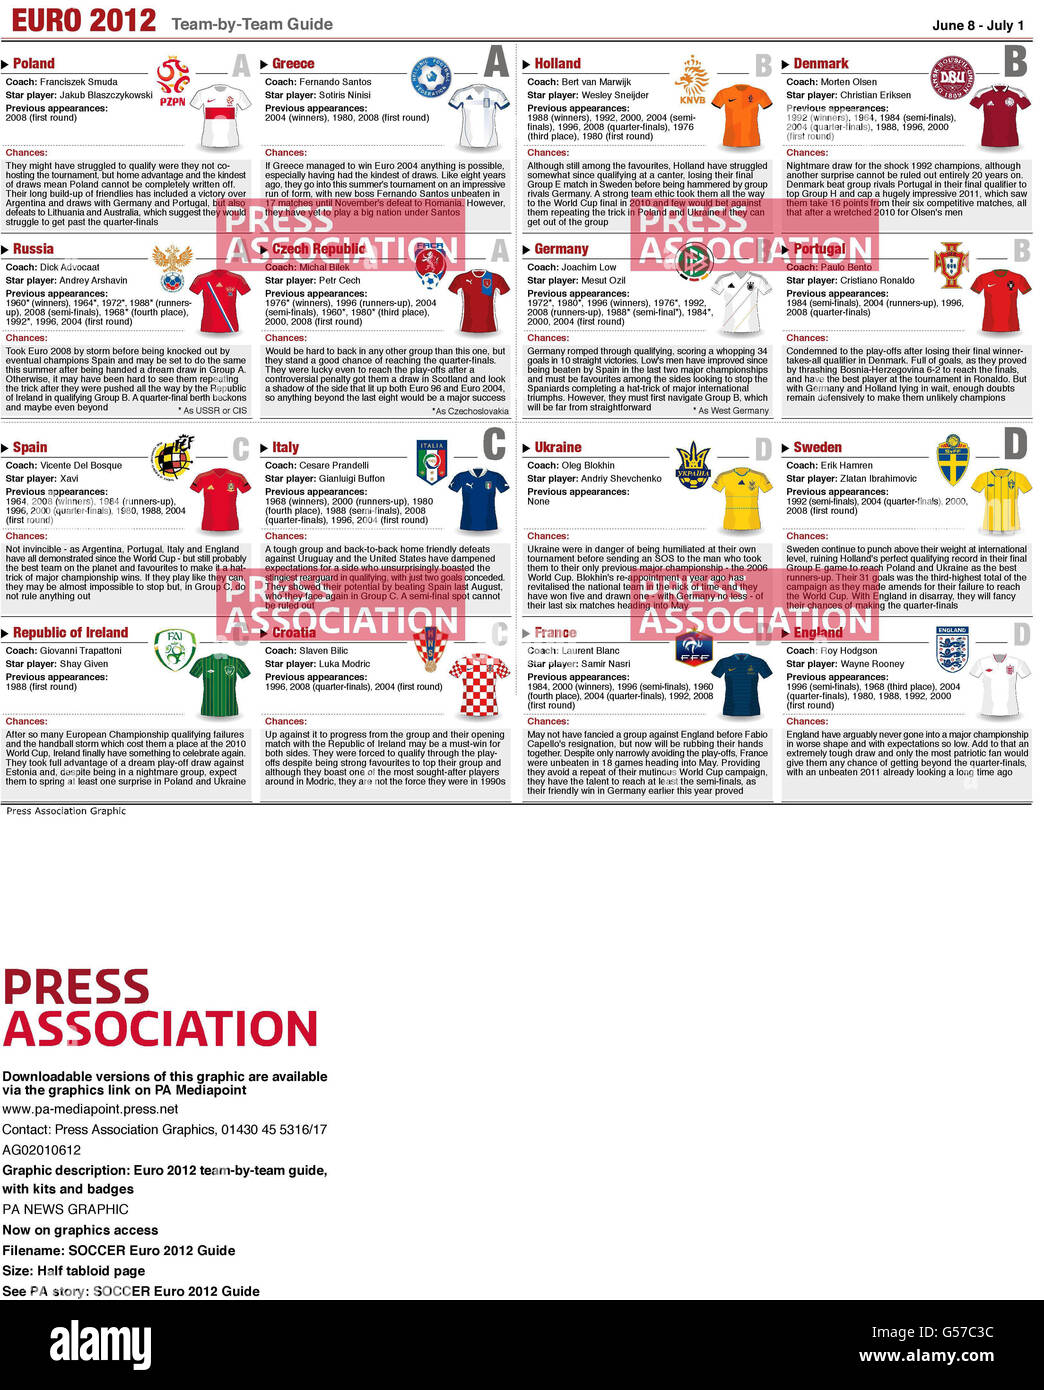 SOCCER: England Championship crests 2011-12 infographic